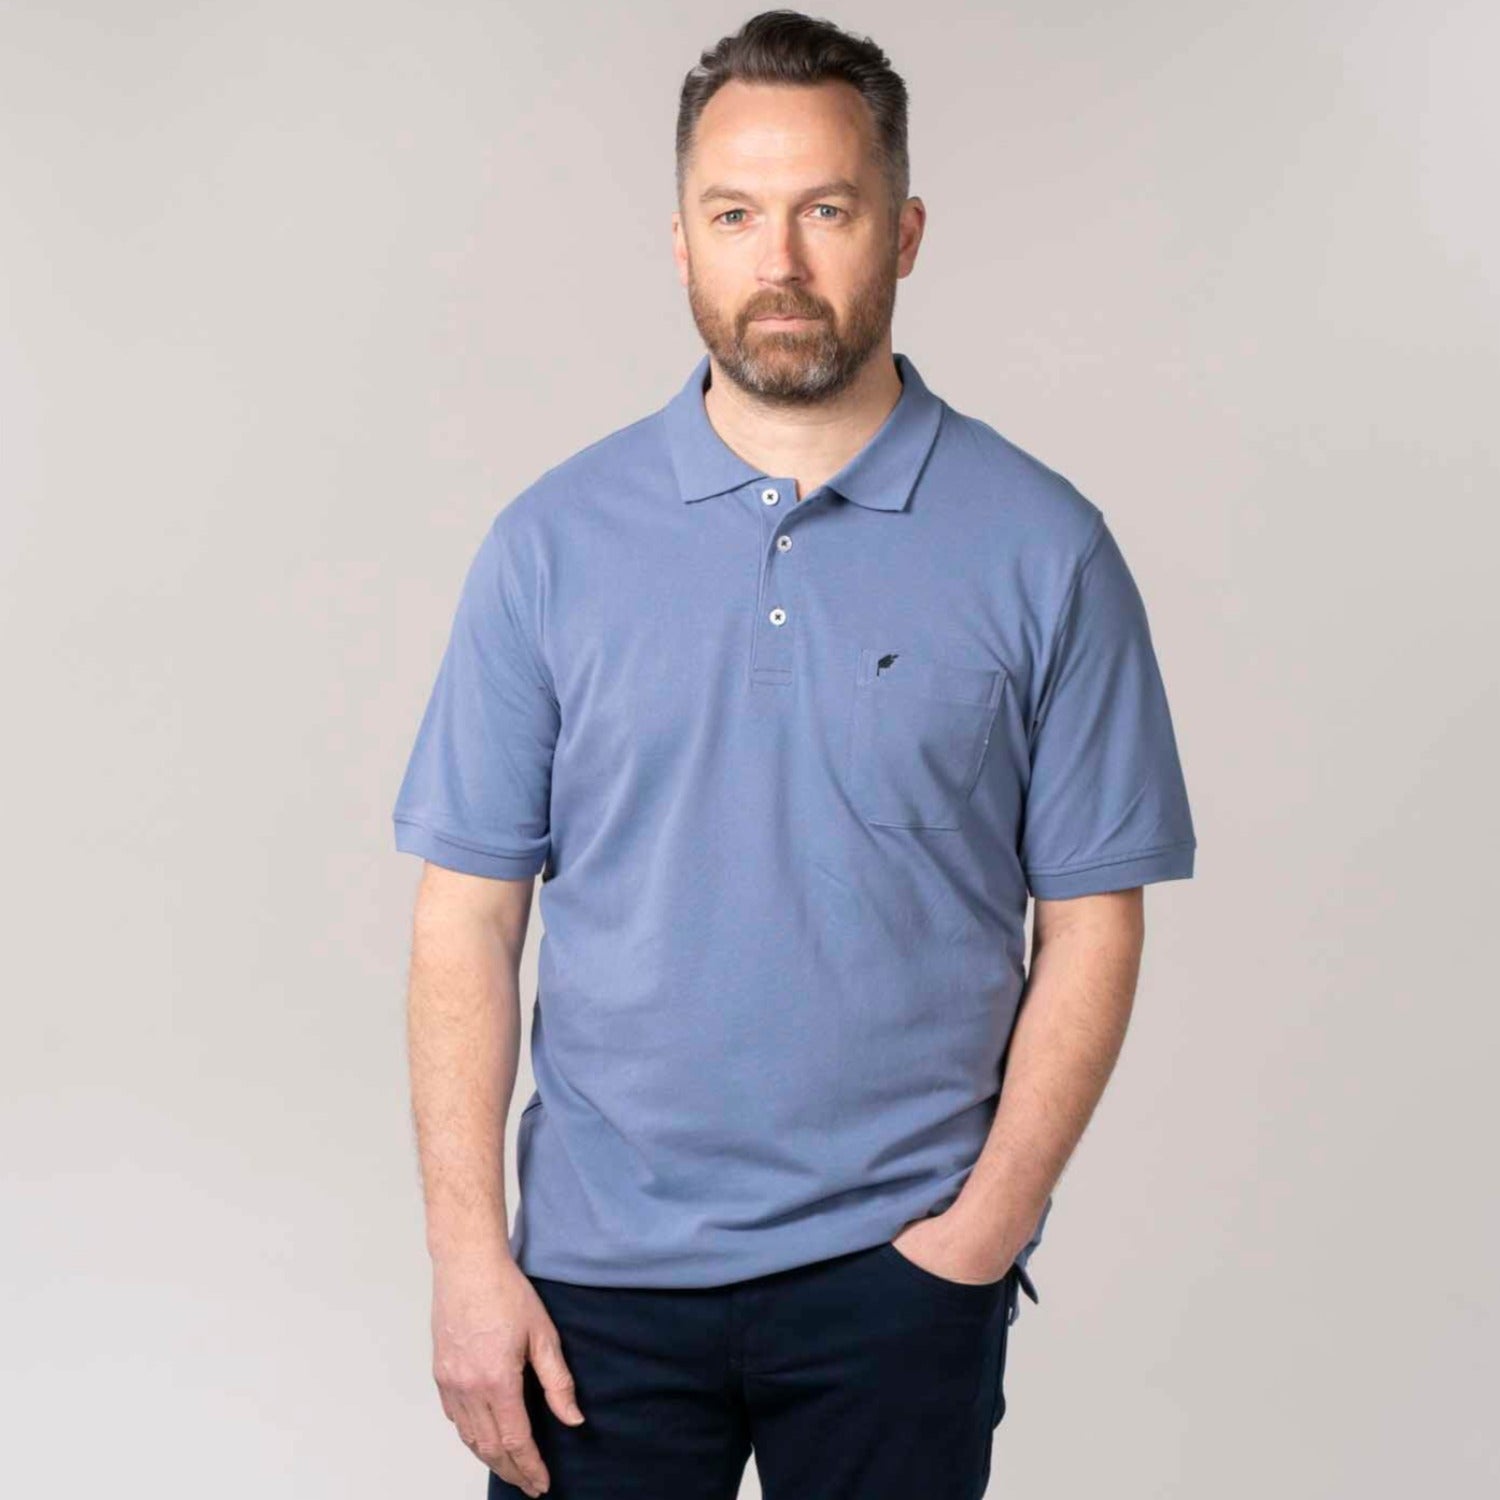 Yeats Niels Short-sleeve Polo Thunder Blue 1 Shaws Department Stores